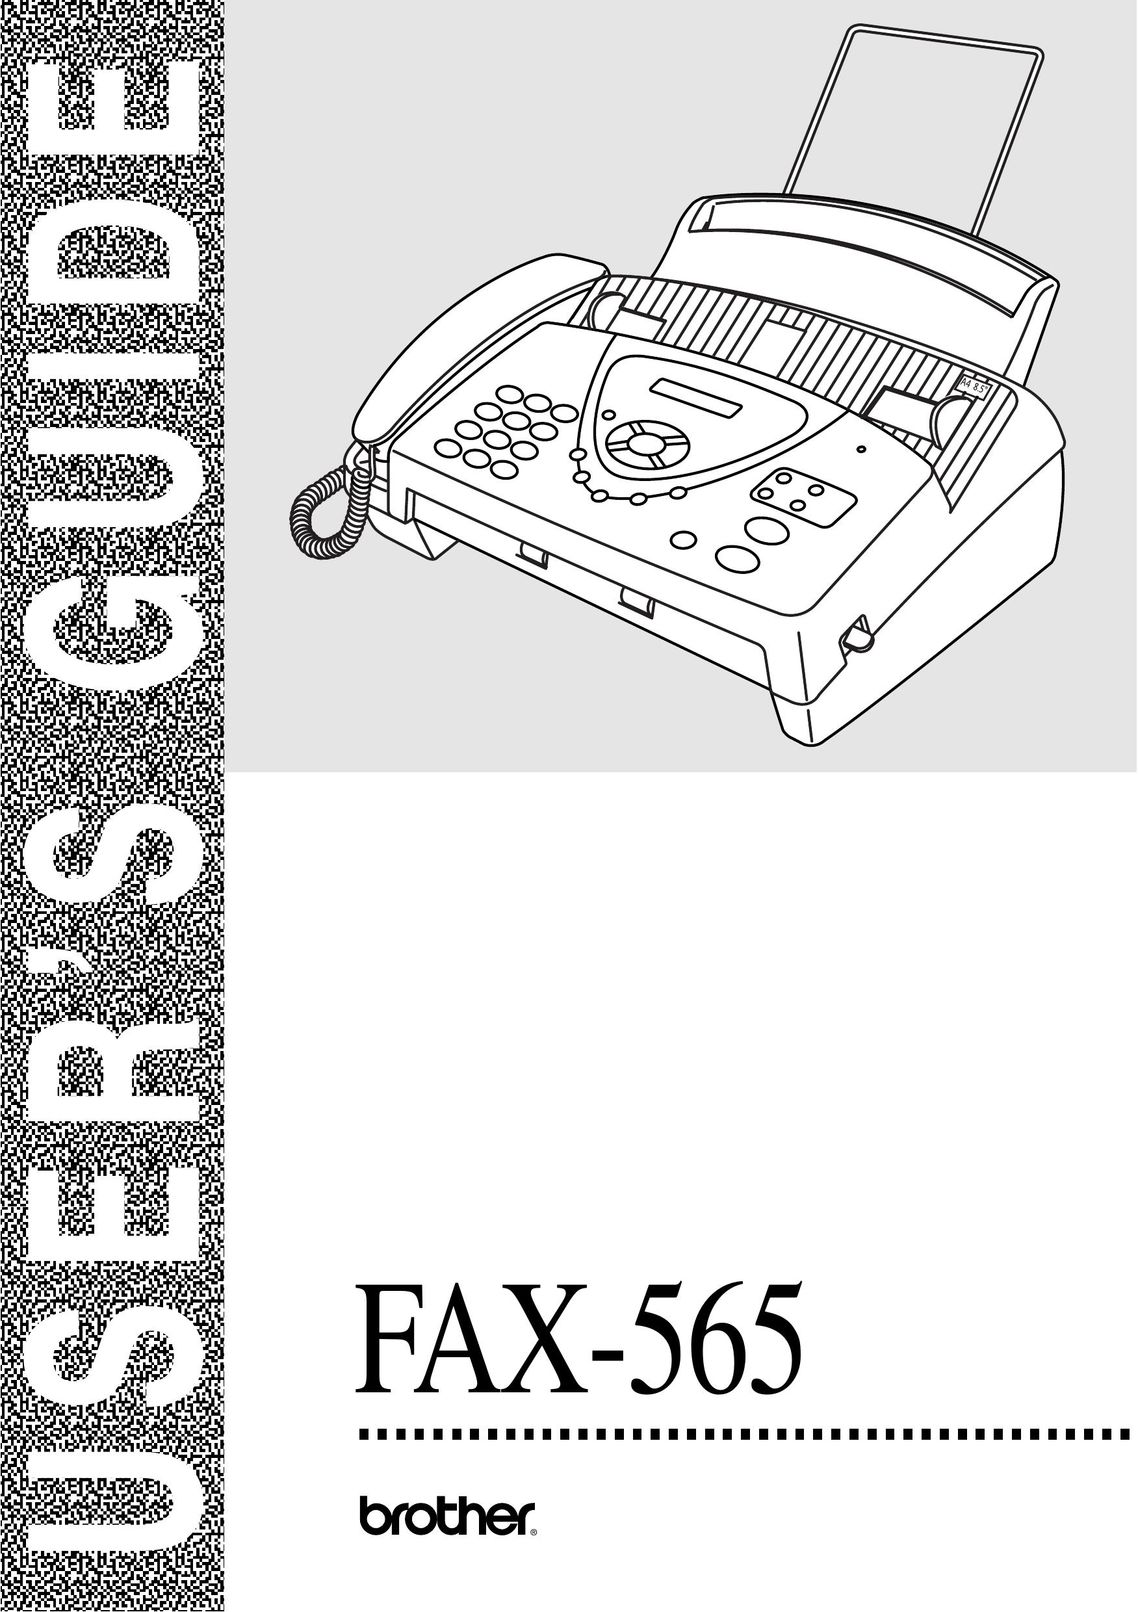 Brother 565 Fax Machine User Manual